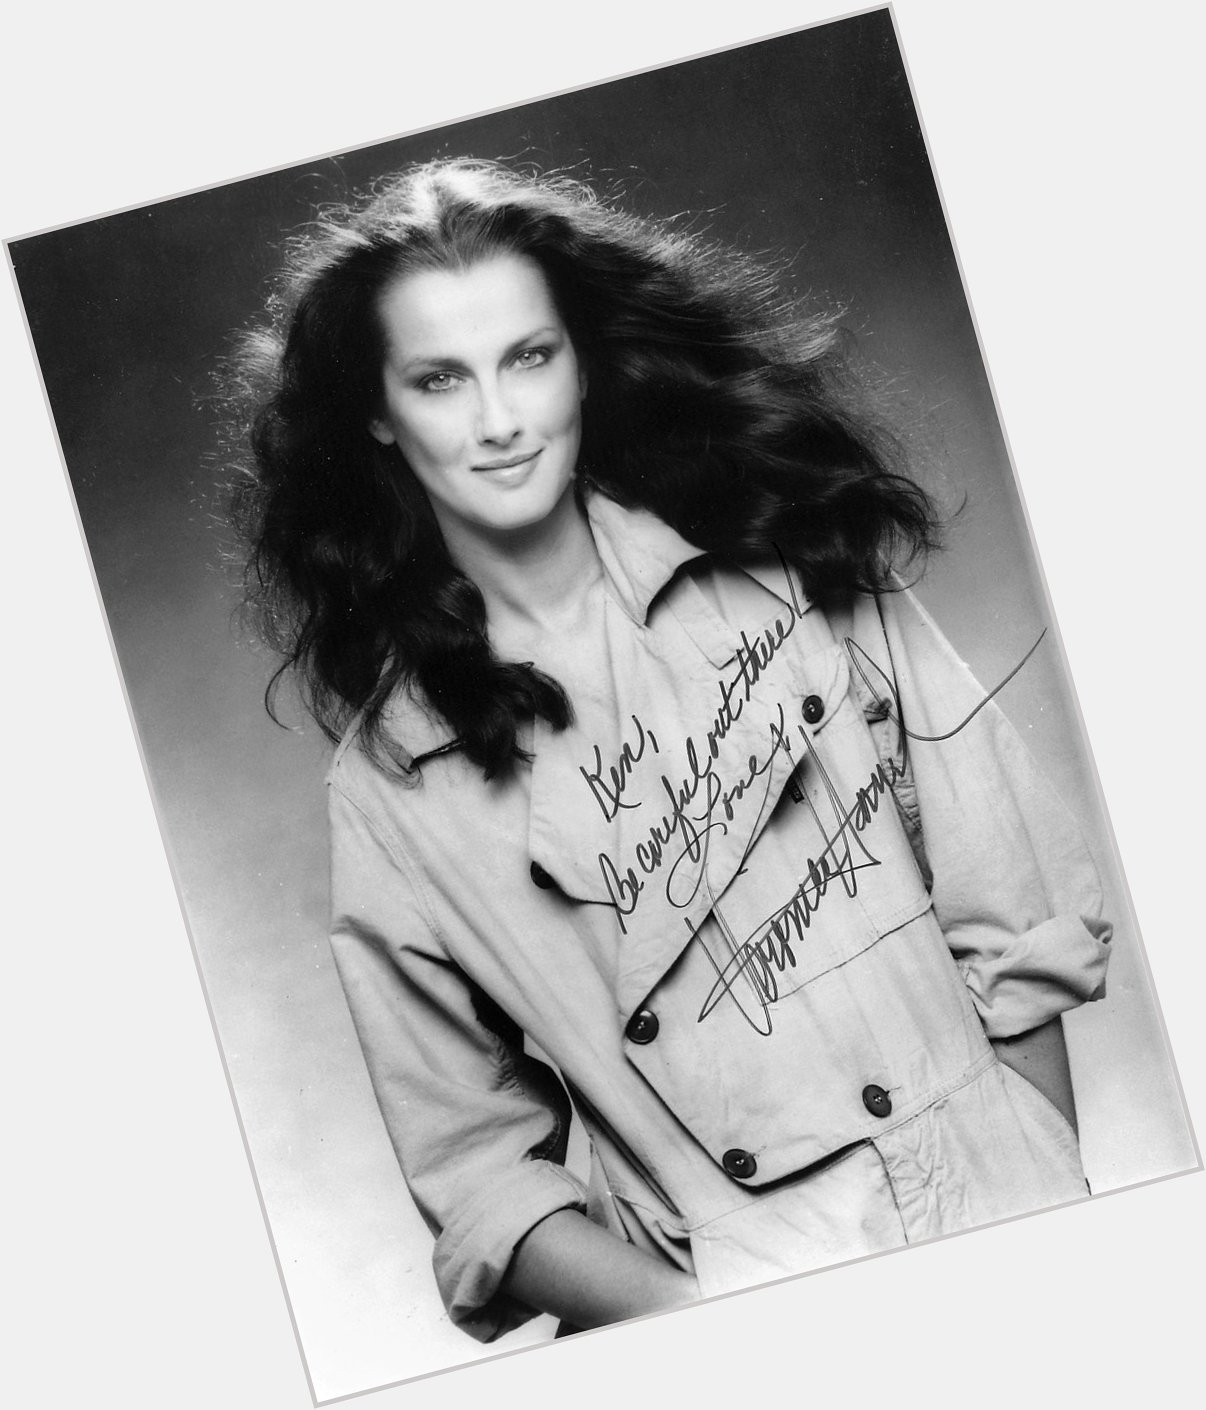 Happy 74th Birthday to the lovely & talented Veronica Hamel!  